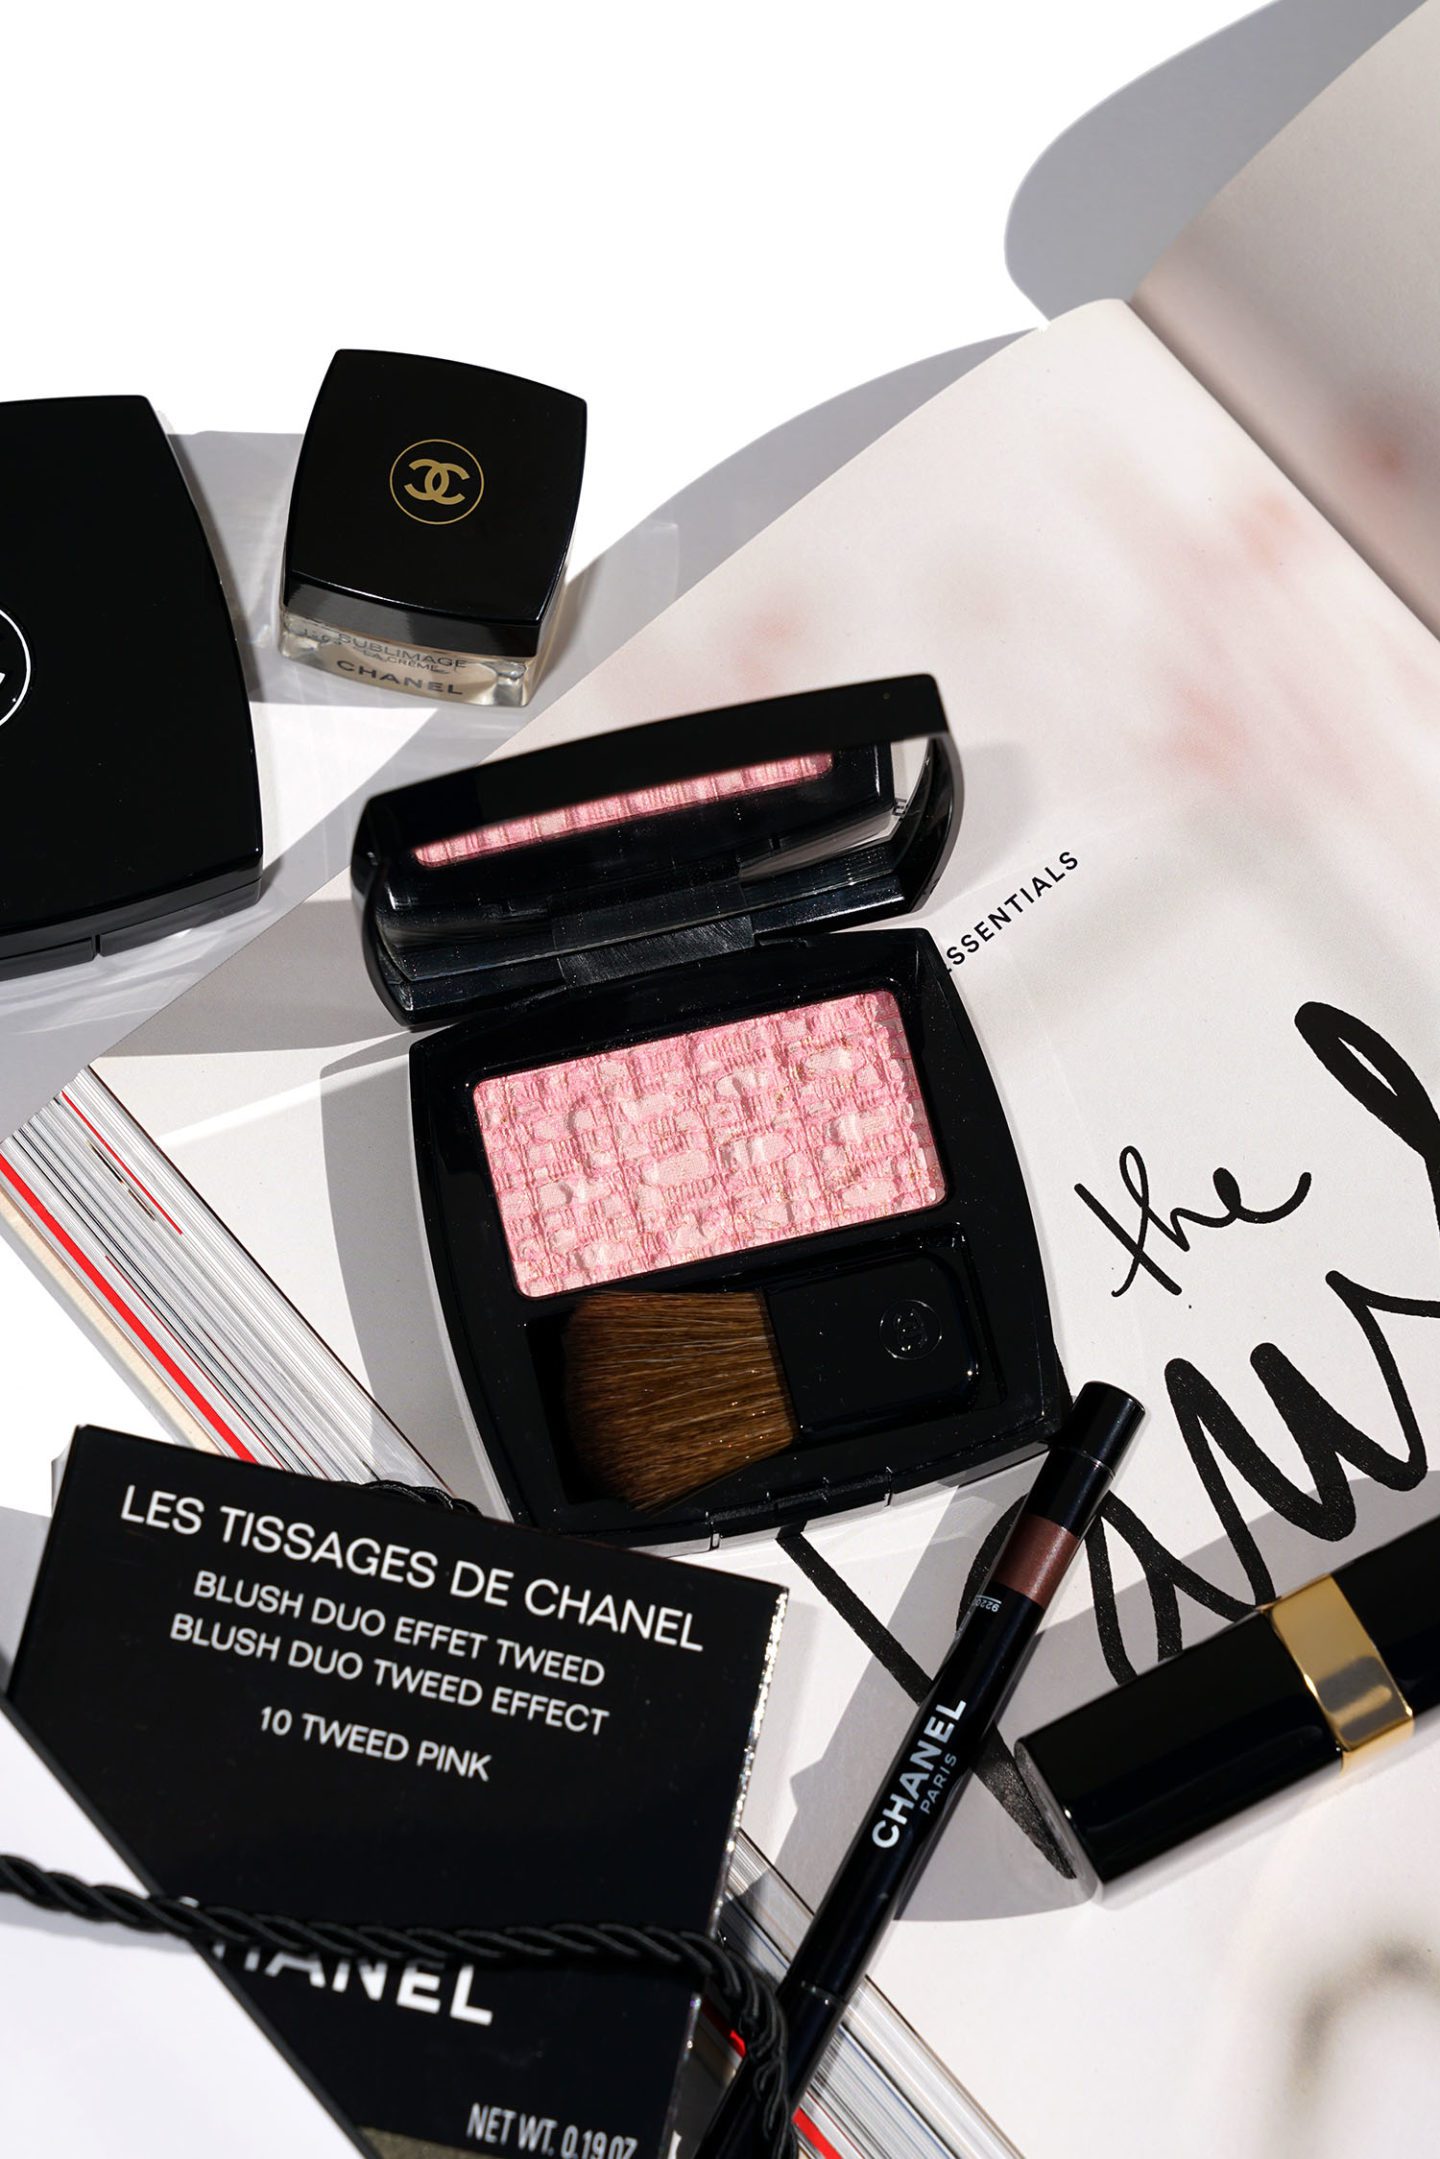 New Chanel Les Tissages de Chanel Tweed Pink Blush The Beauty Look Book